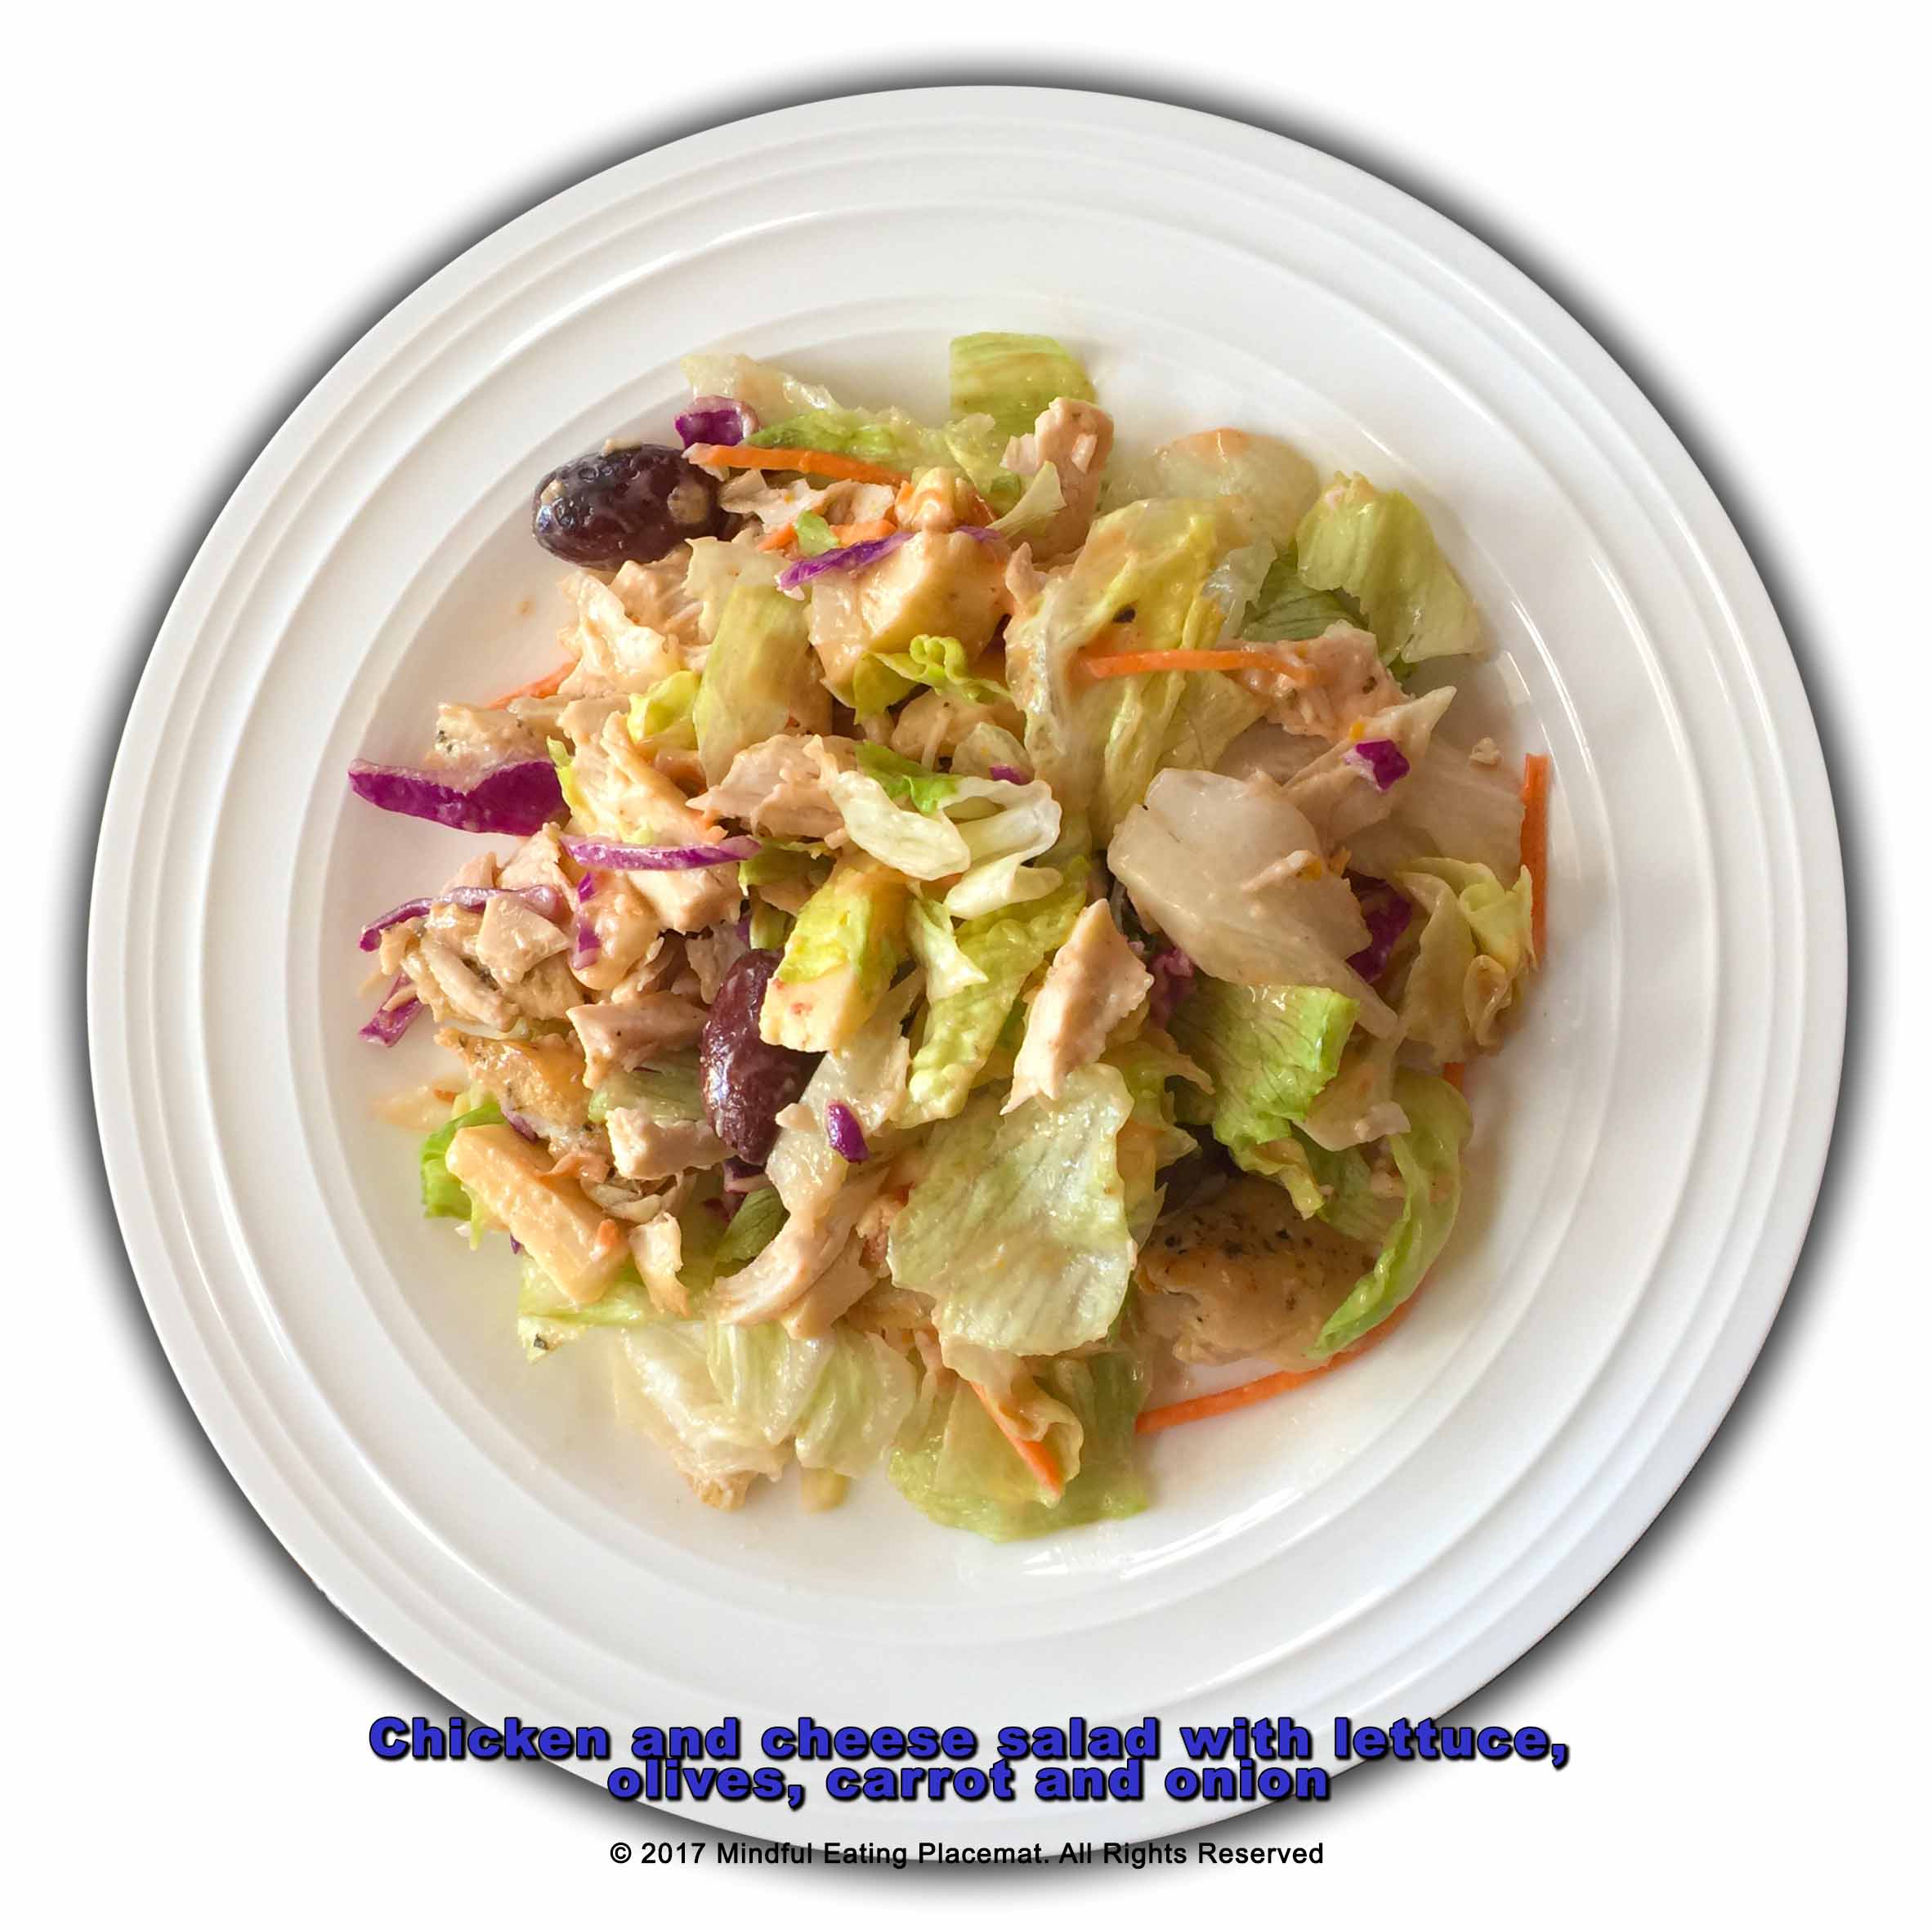 Chicken and cheese salad with lettuce, olives, carrot and onion